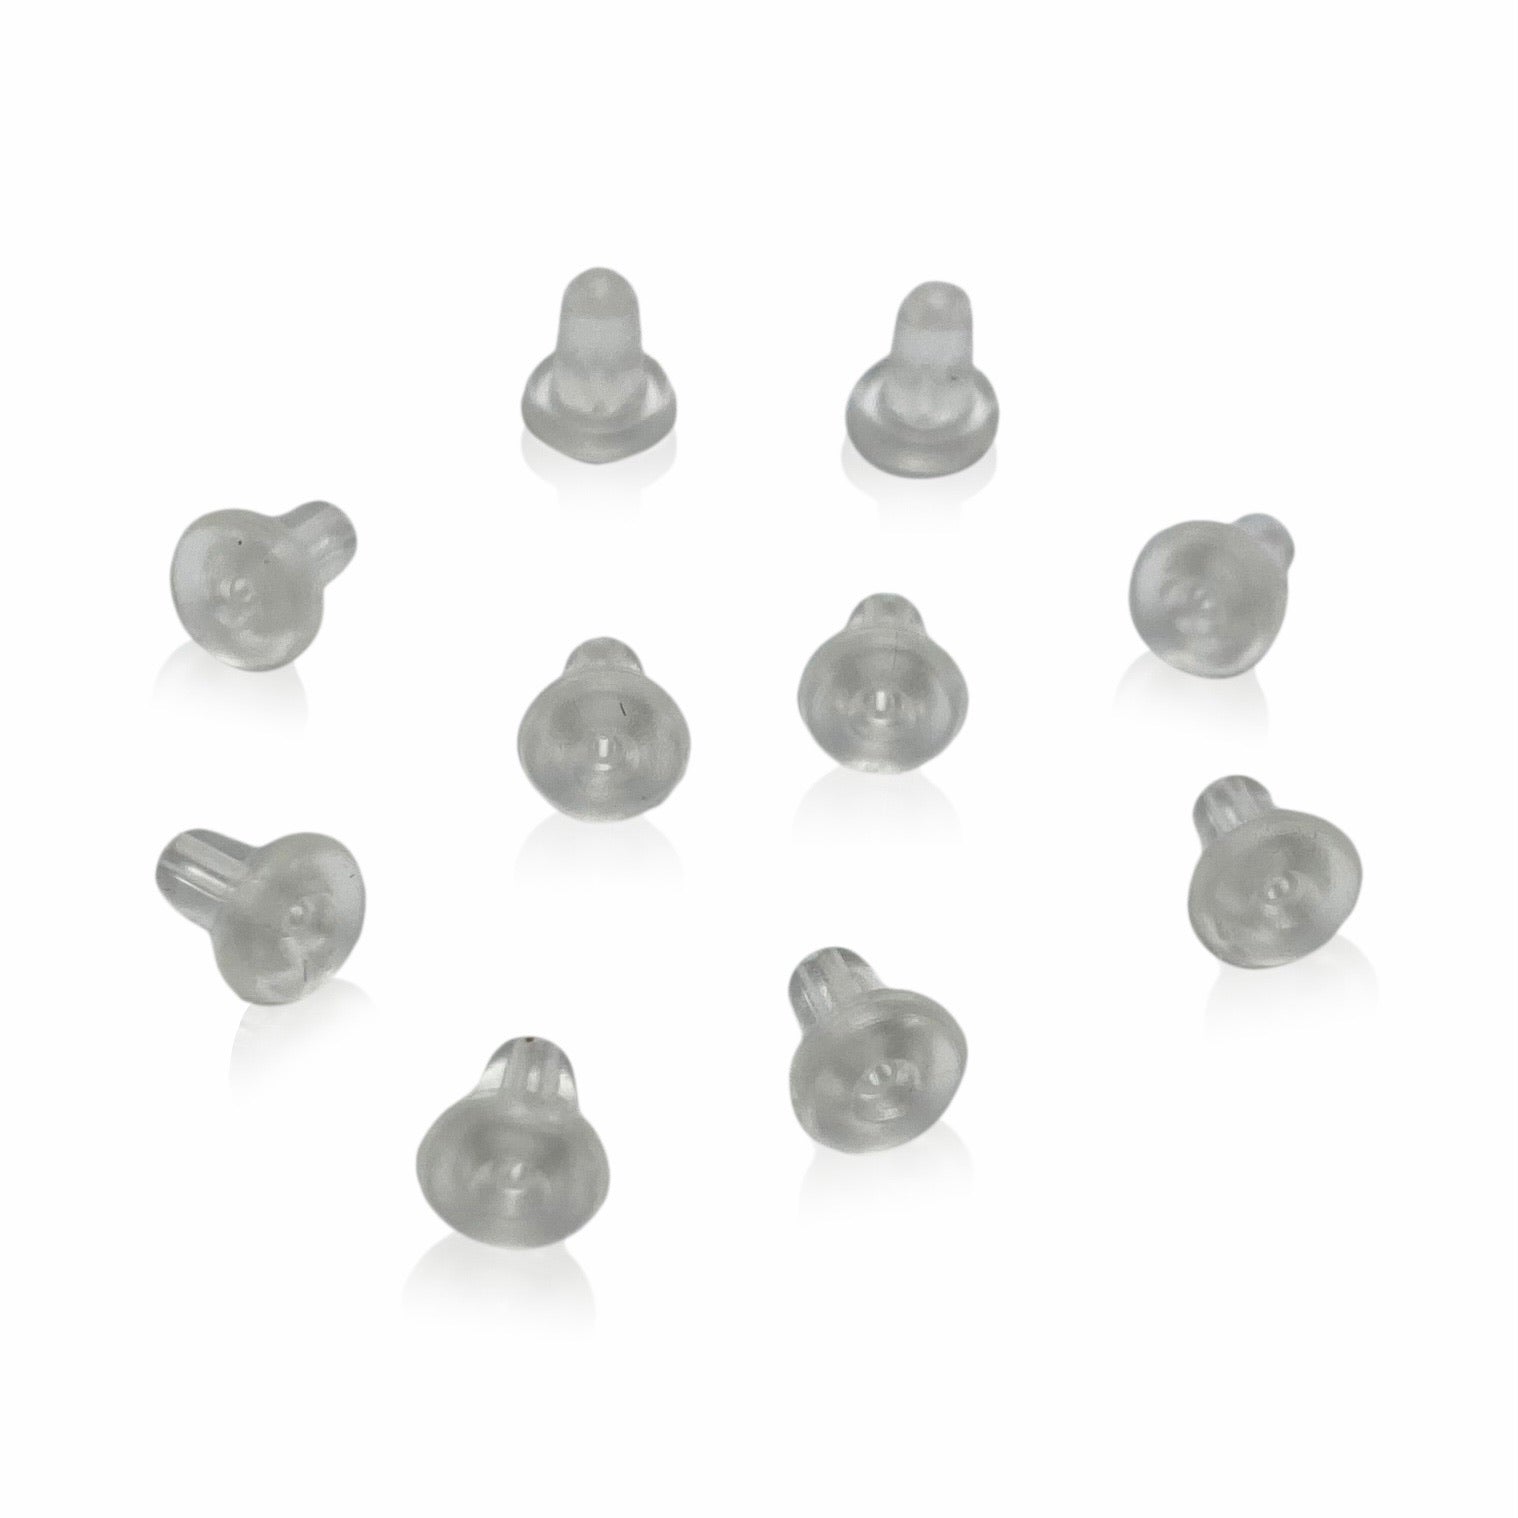 Spare Rubber Earring Backs (5 Pairs)